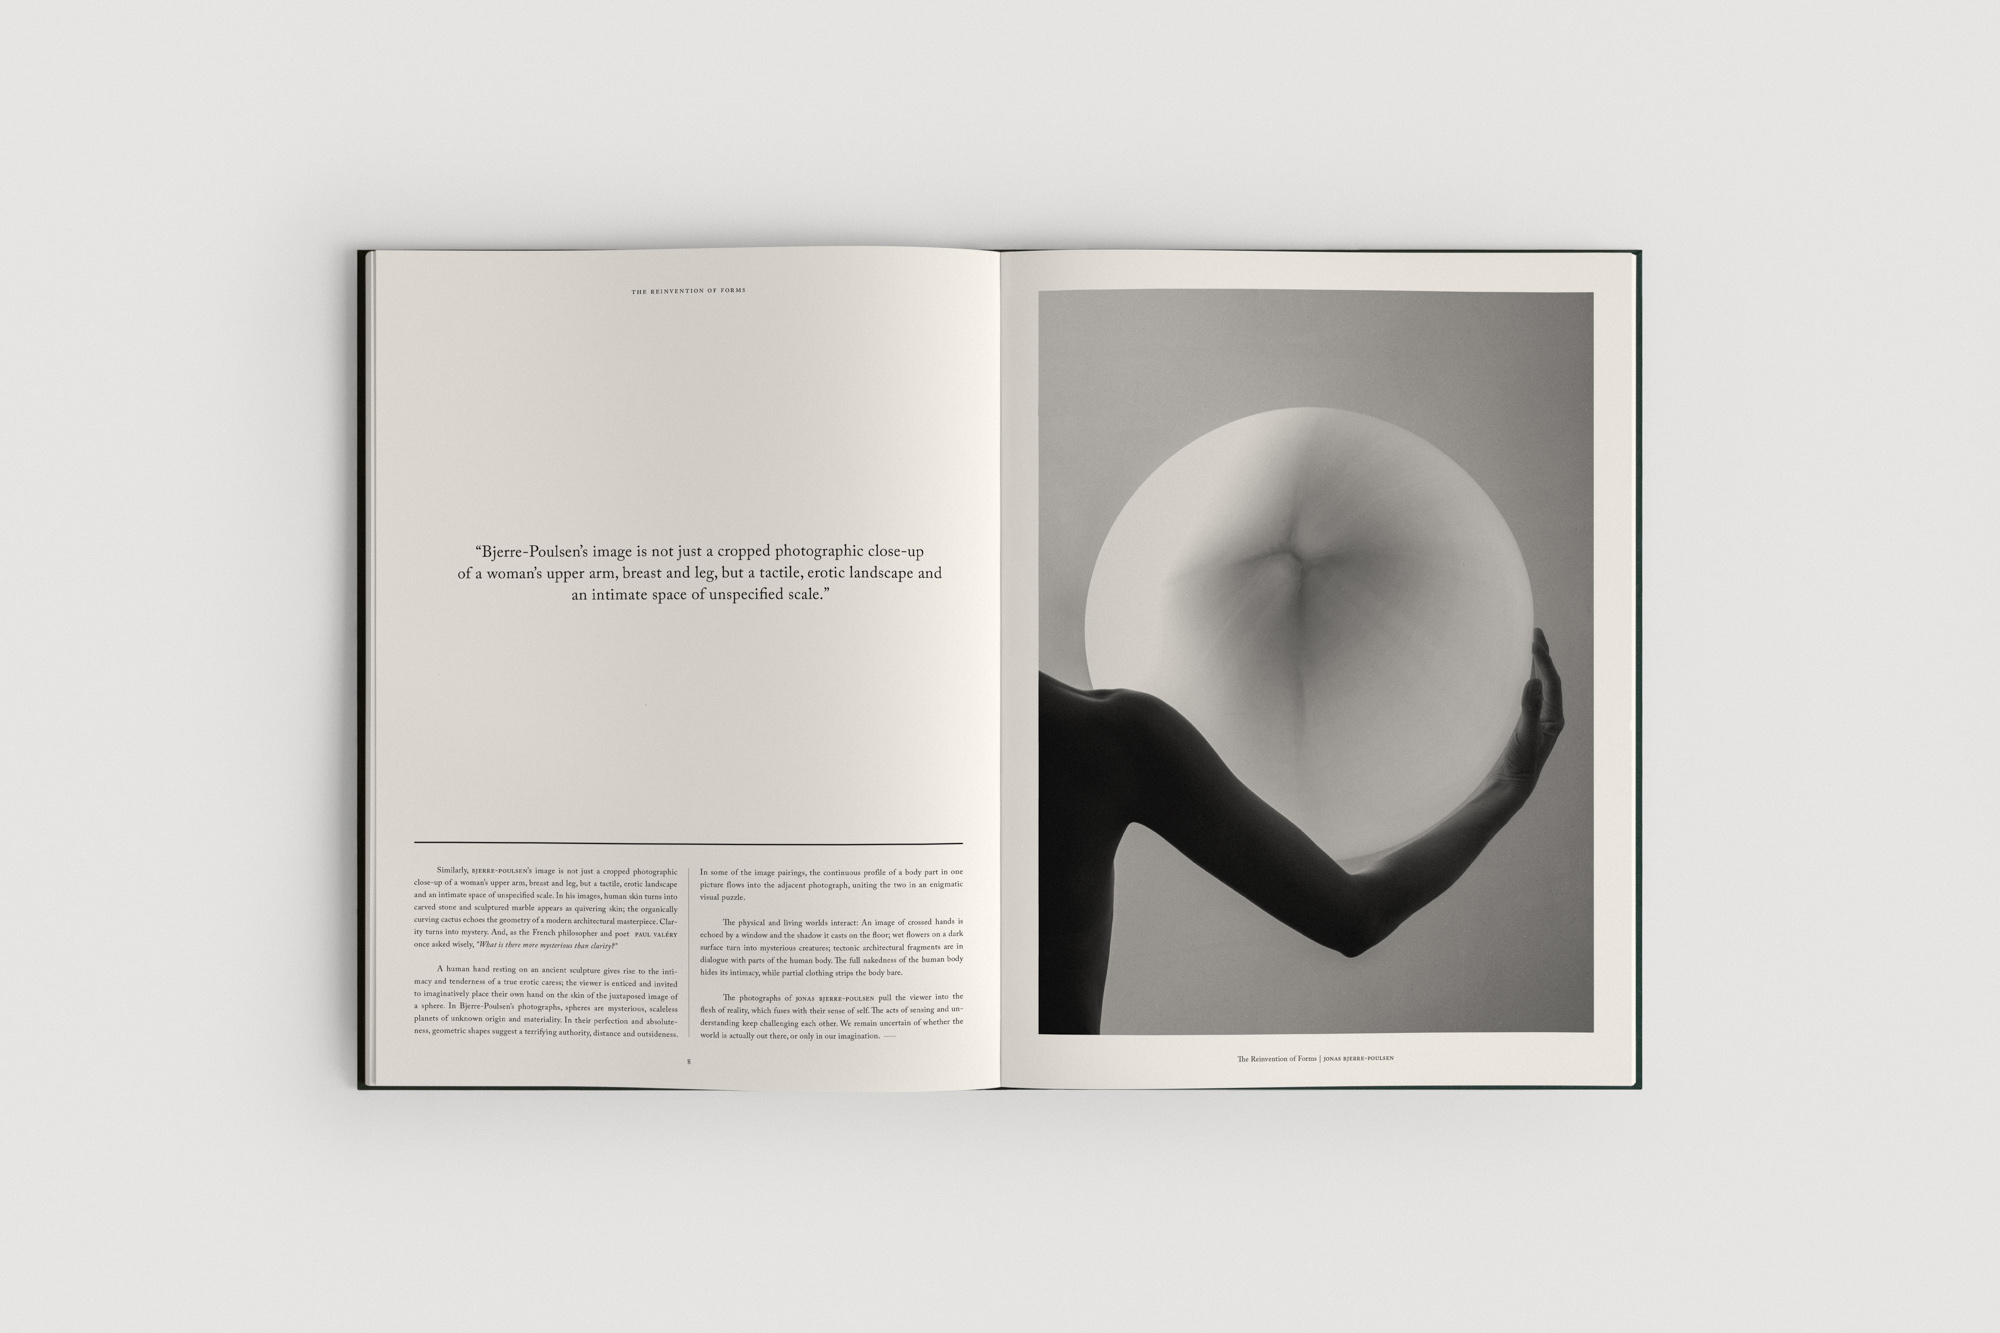 Jonas-Bjerre-Poulsen-The-Reinvention-of-Forms-Book-Packshots-Web-17